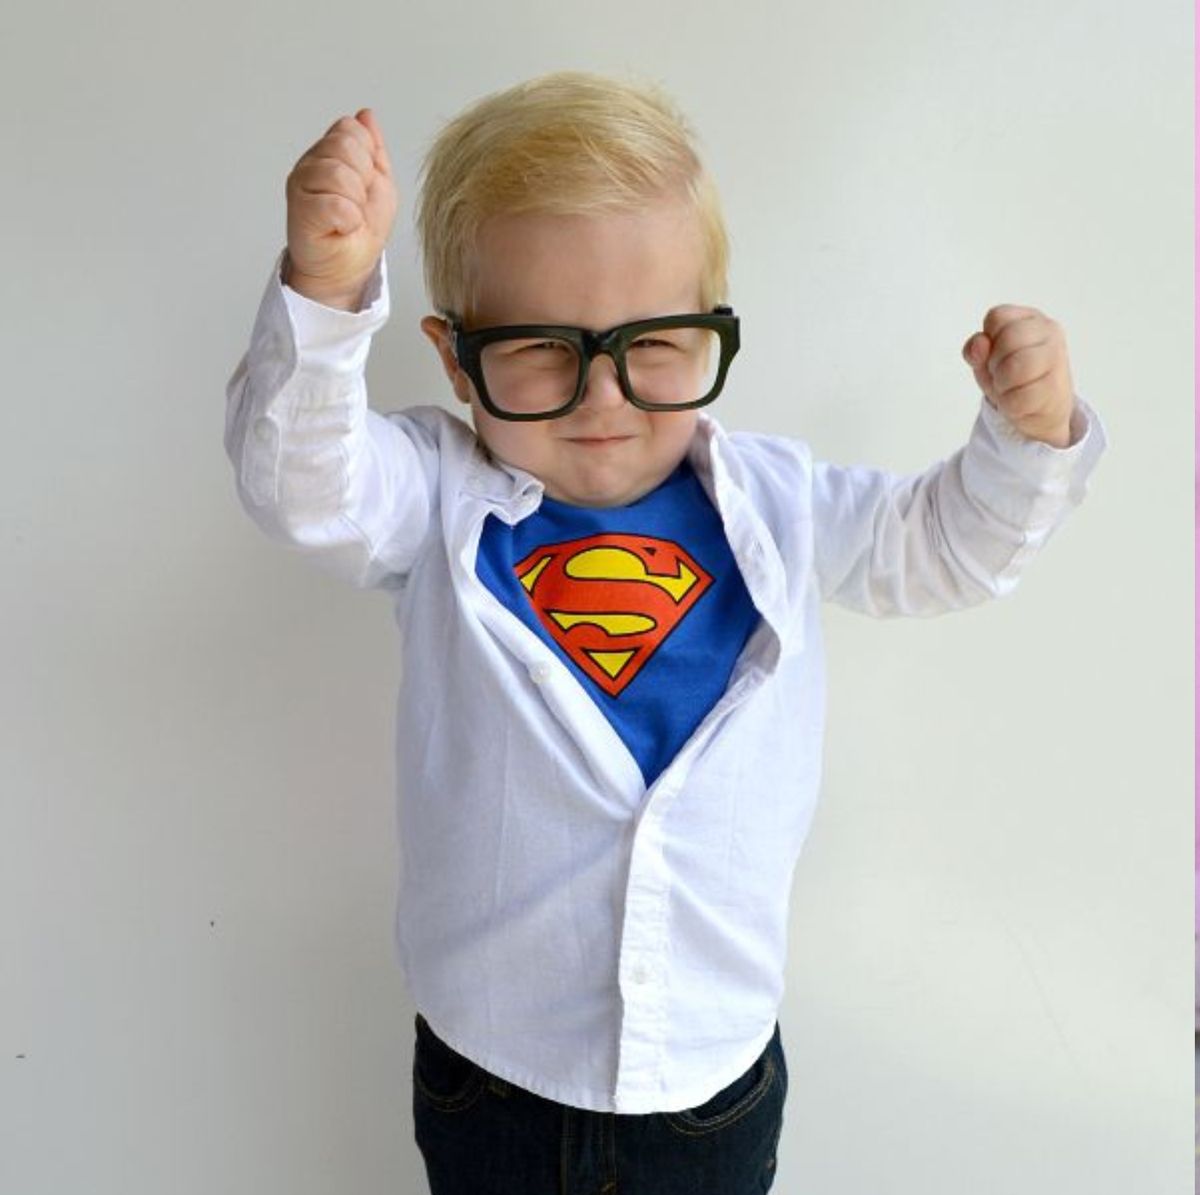 46 Cute Toddler Halloween Costume Ideas 2022 - How Make Toddler Boy and Girl Costumes